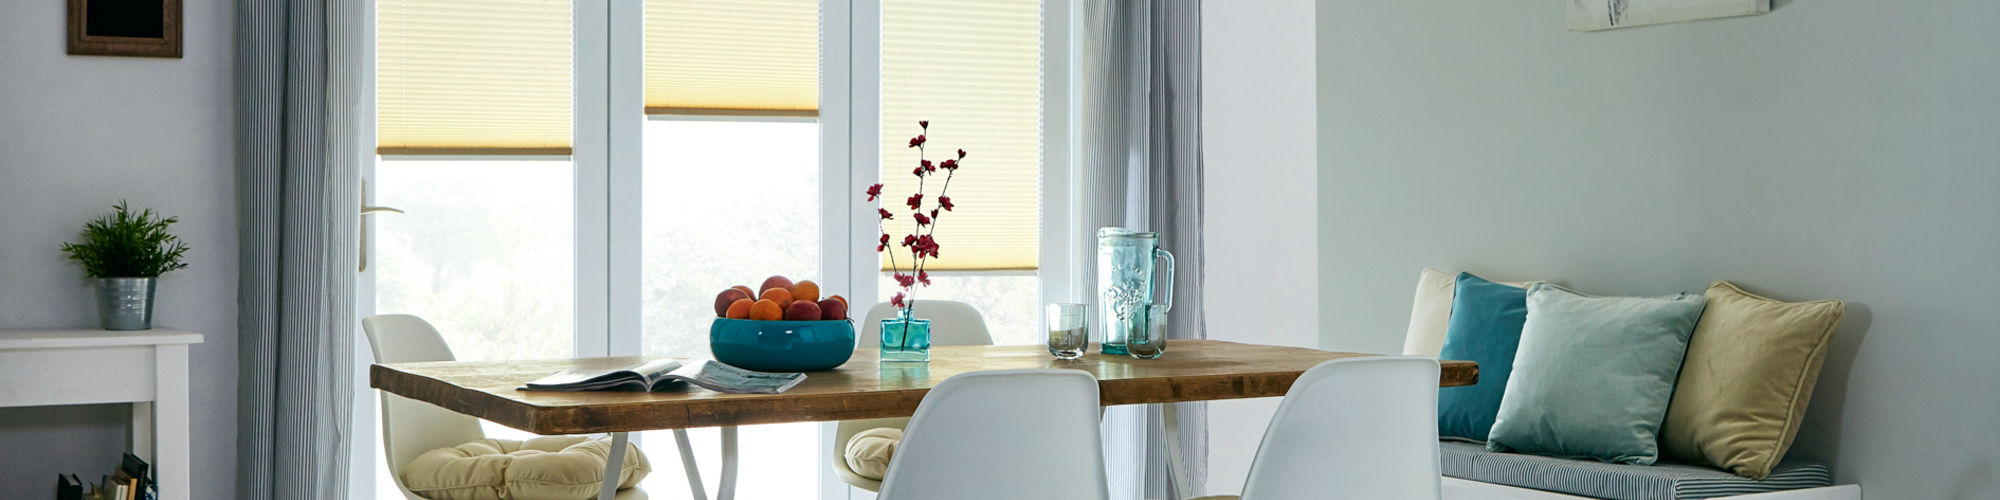 Reduce heat and glare with Pleated blinds from Blind Revolution.